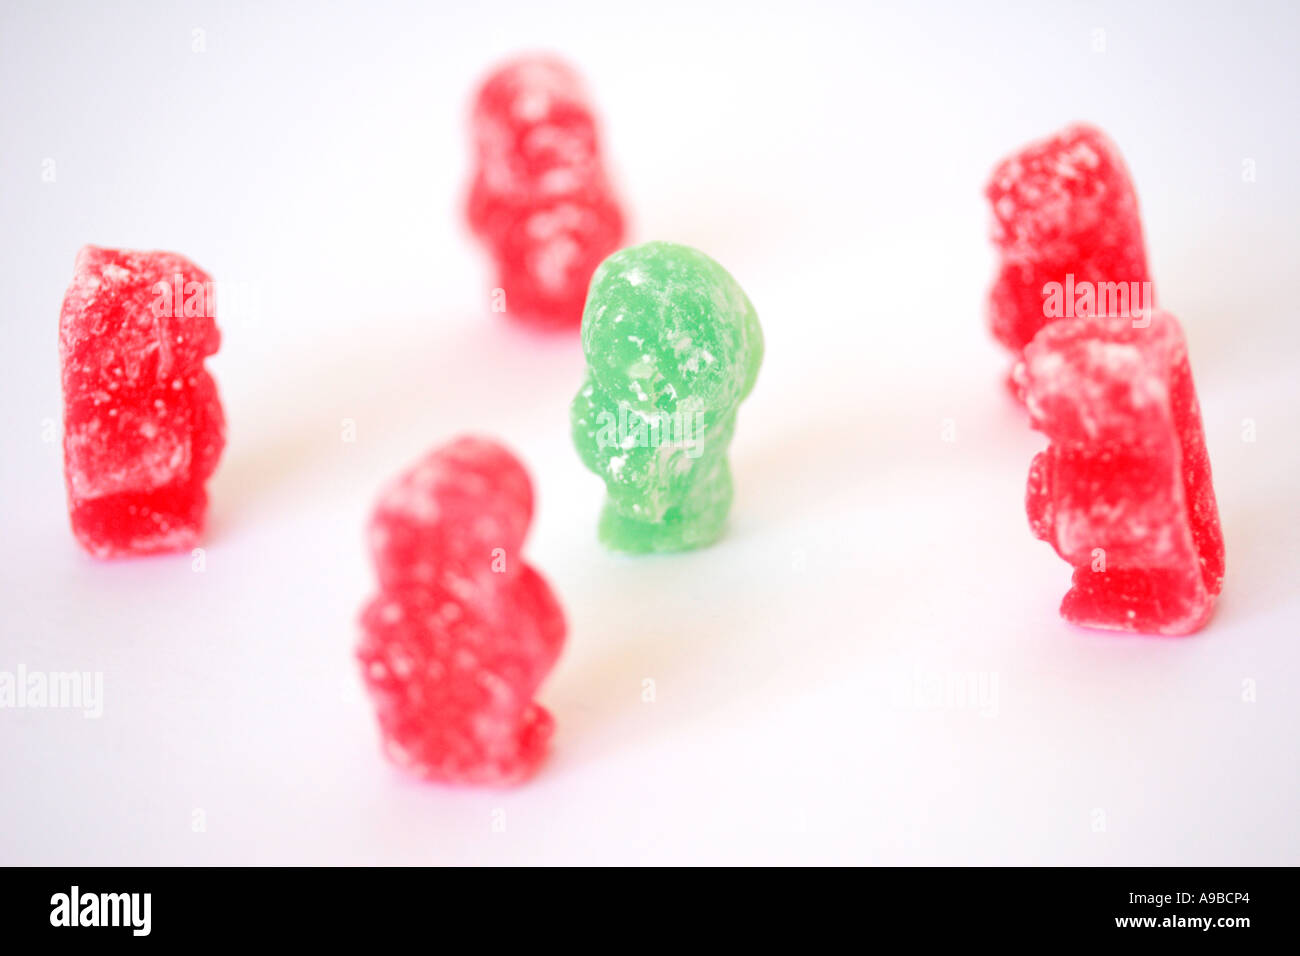 Green jelly baby amongst gang of pink jelly babies Stock Photo - Alamy